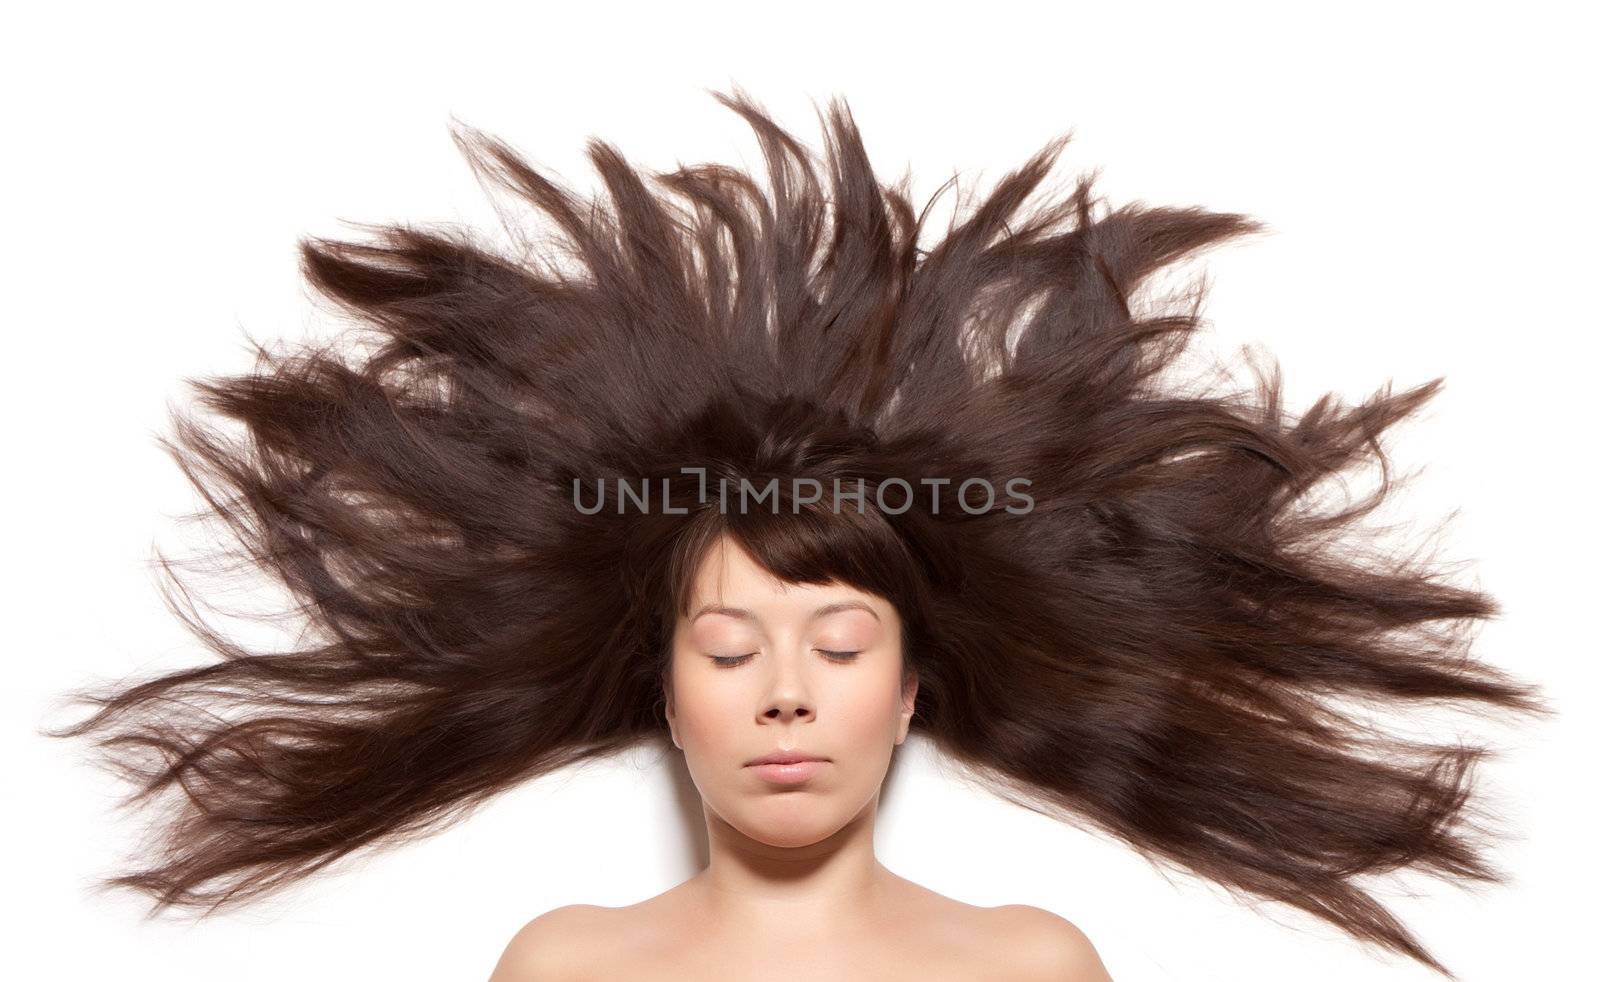 
Woman with long hair straightened on the floor around the head